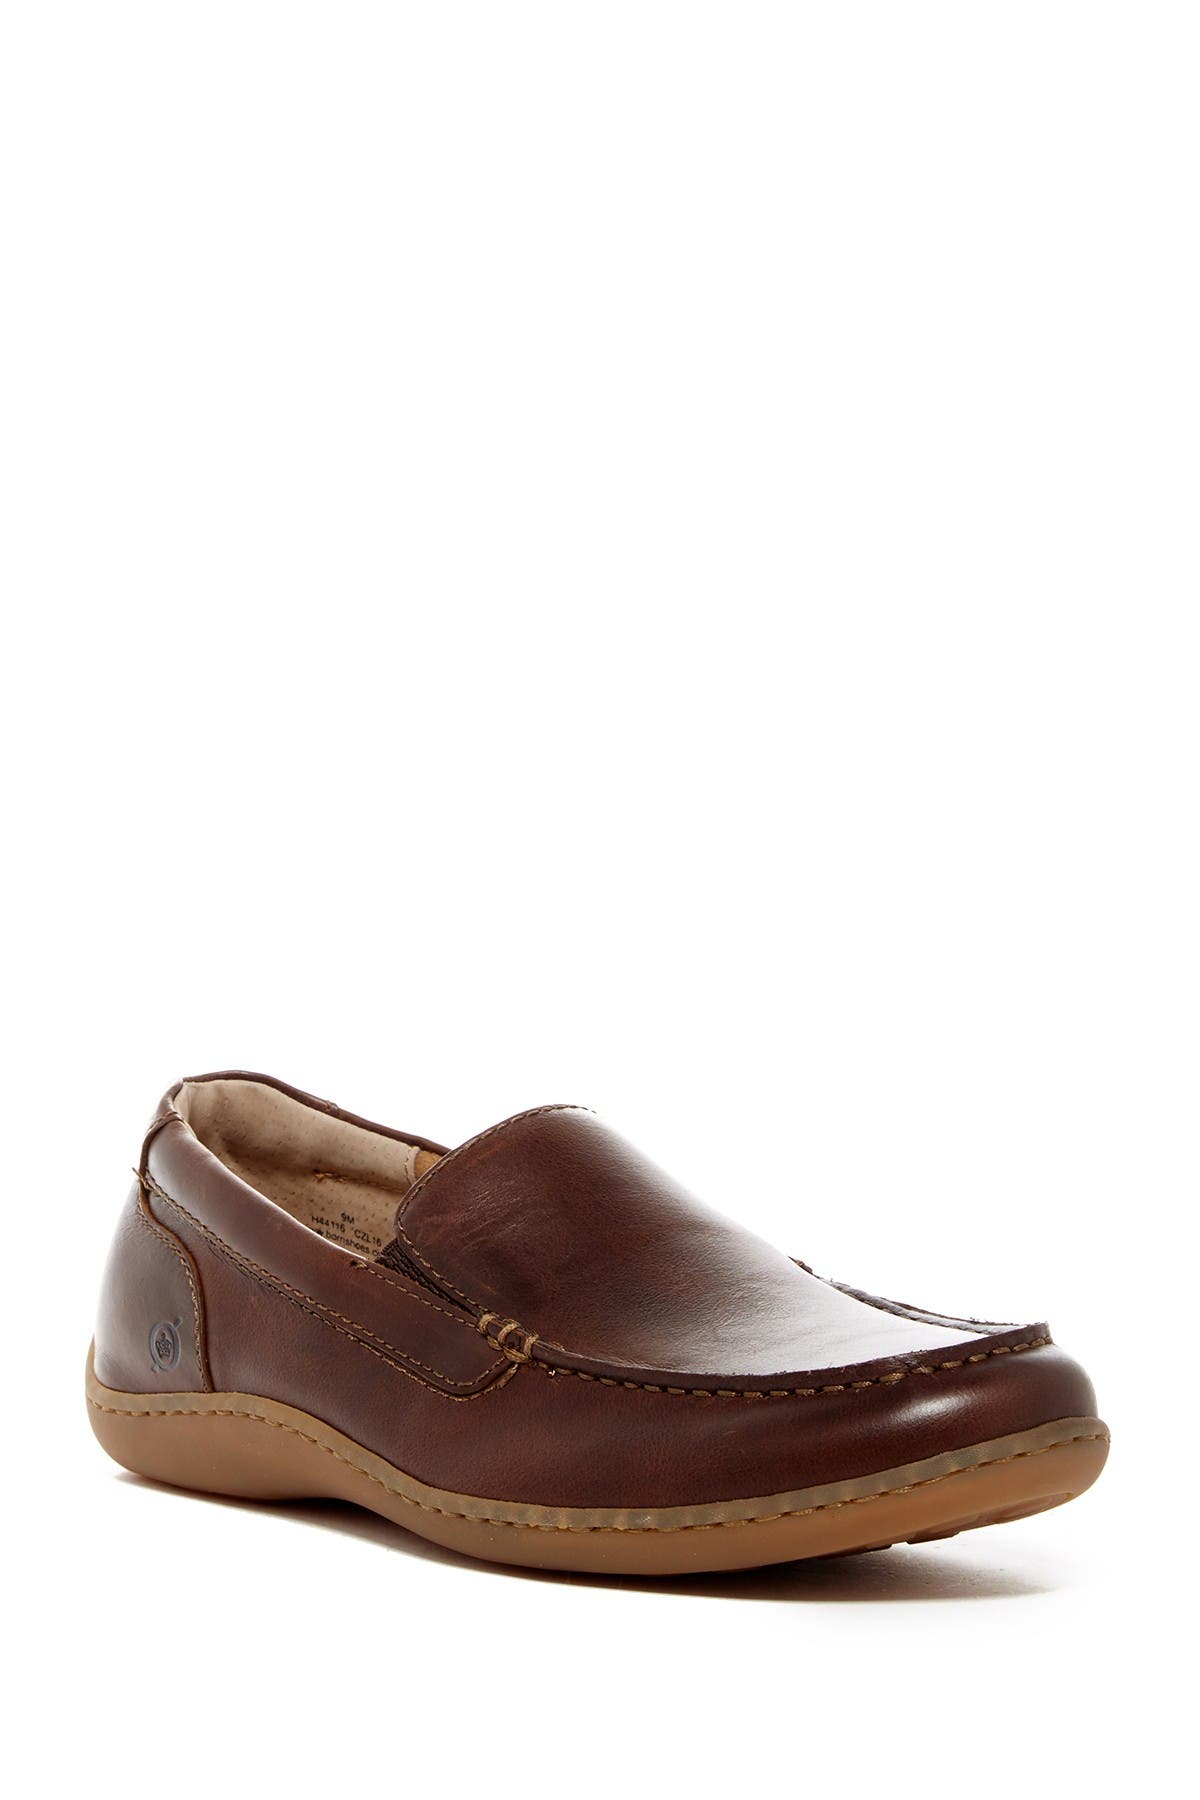 born leather slip on shoes